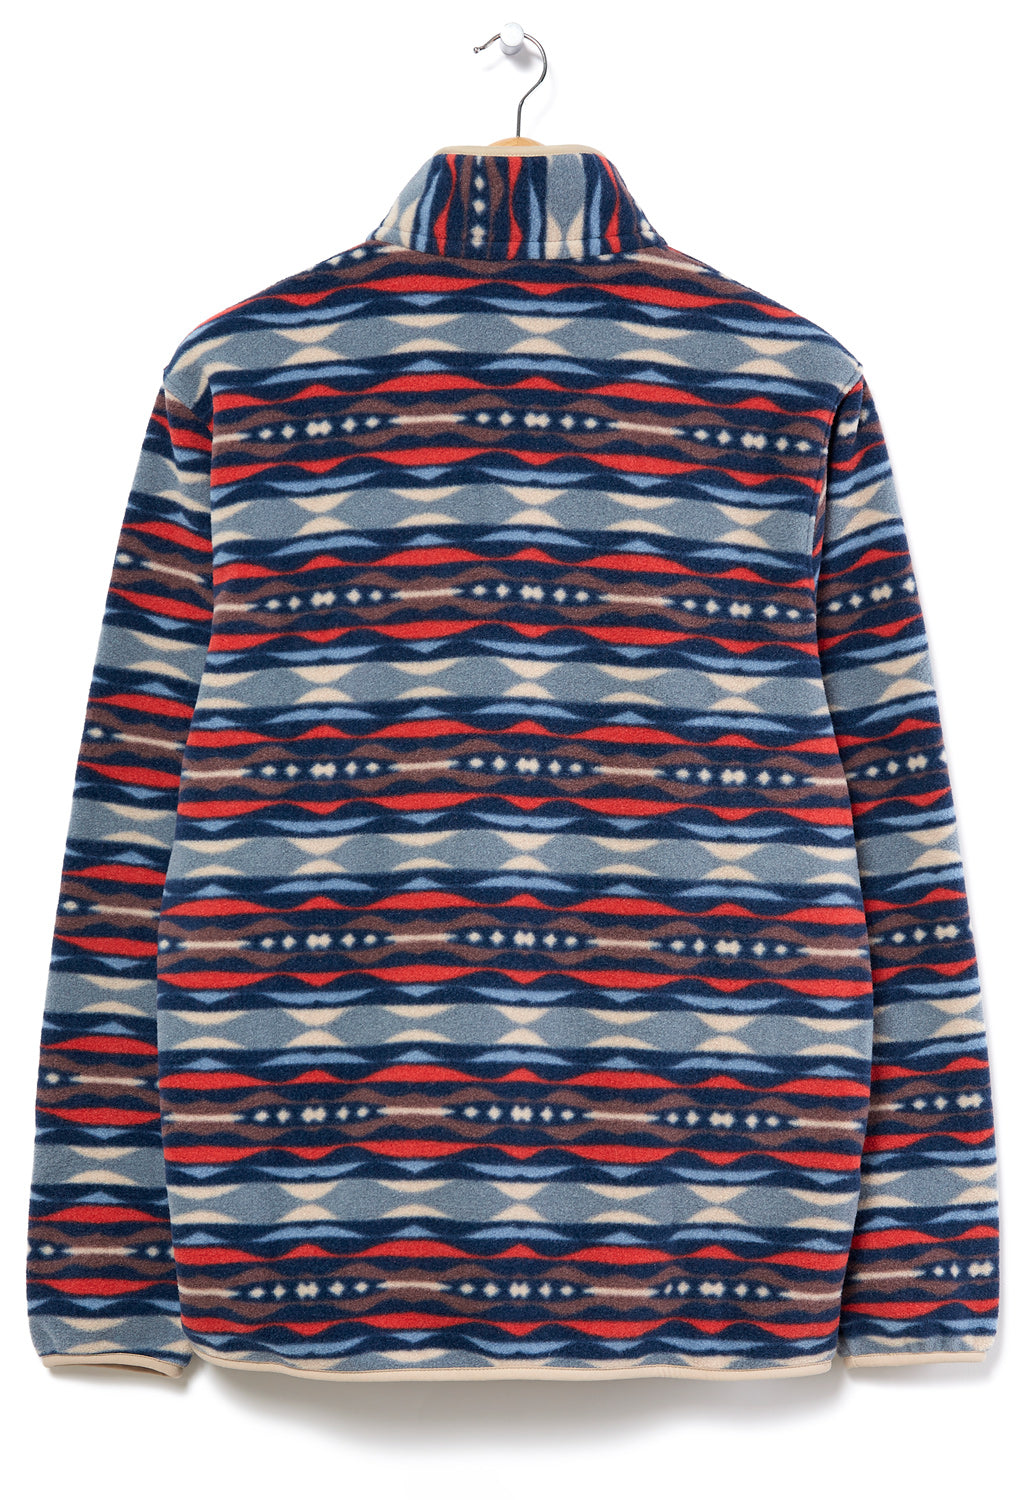 Patagonia Synchilla Snap-T Men's Pullover - Sumac Red/Coast Highway Print